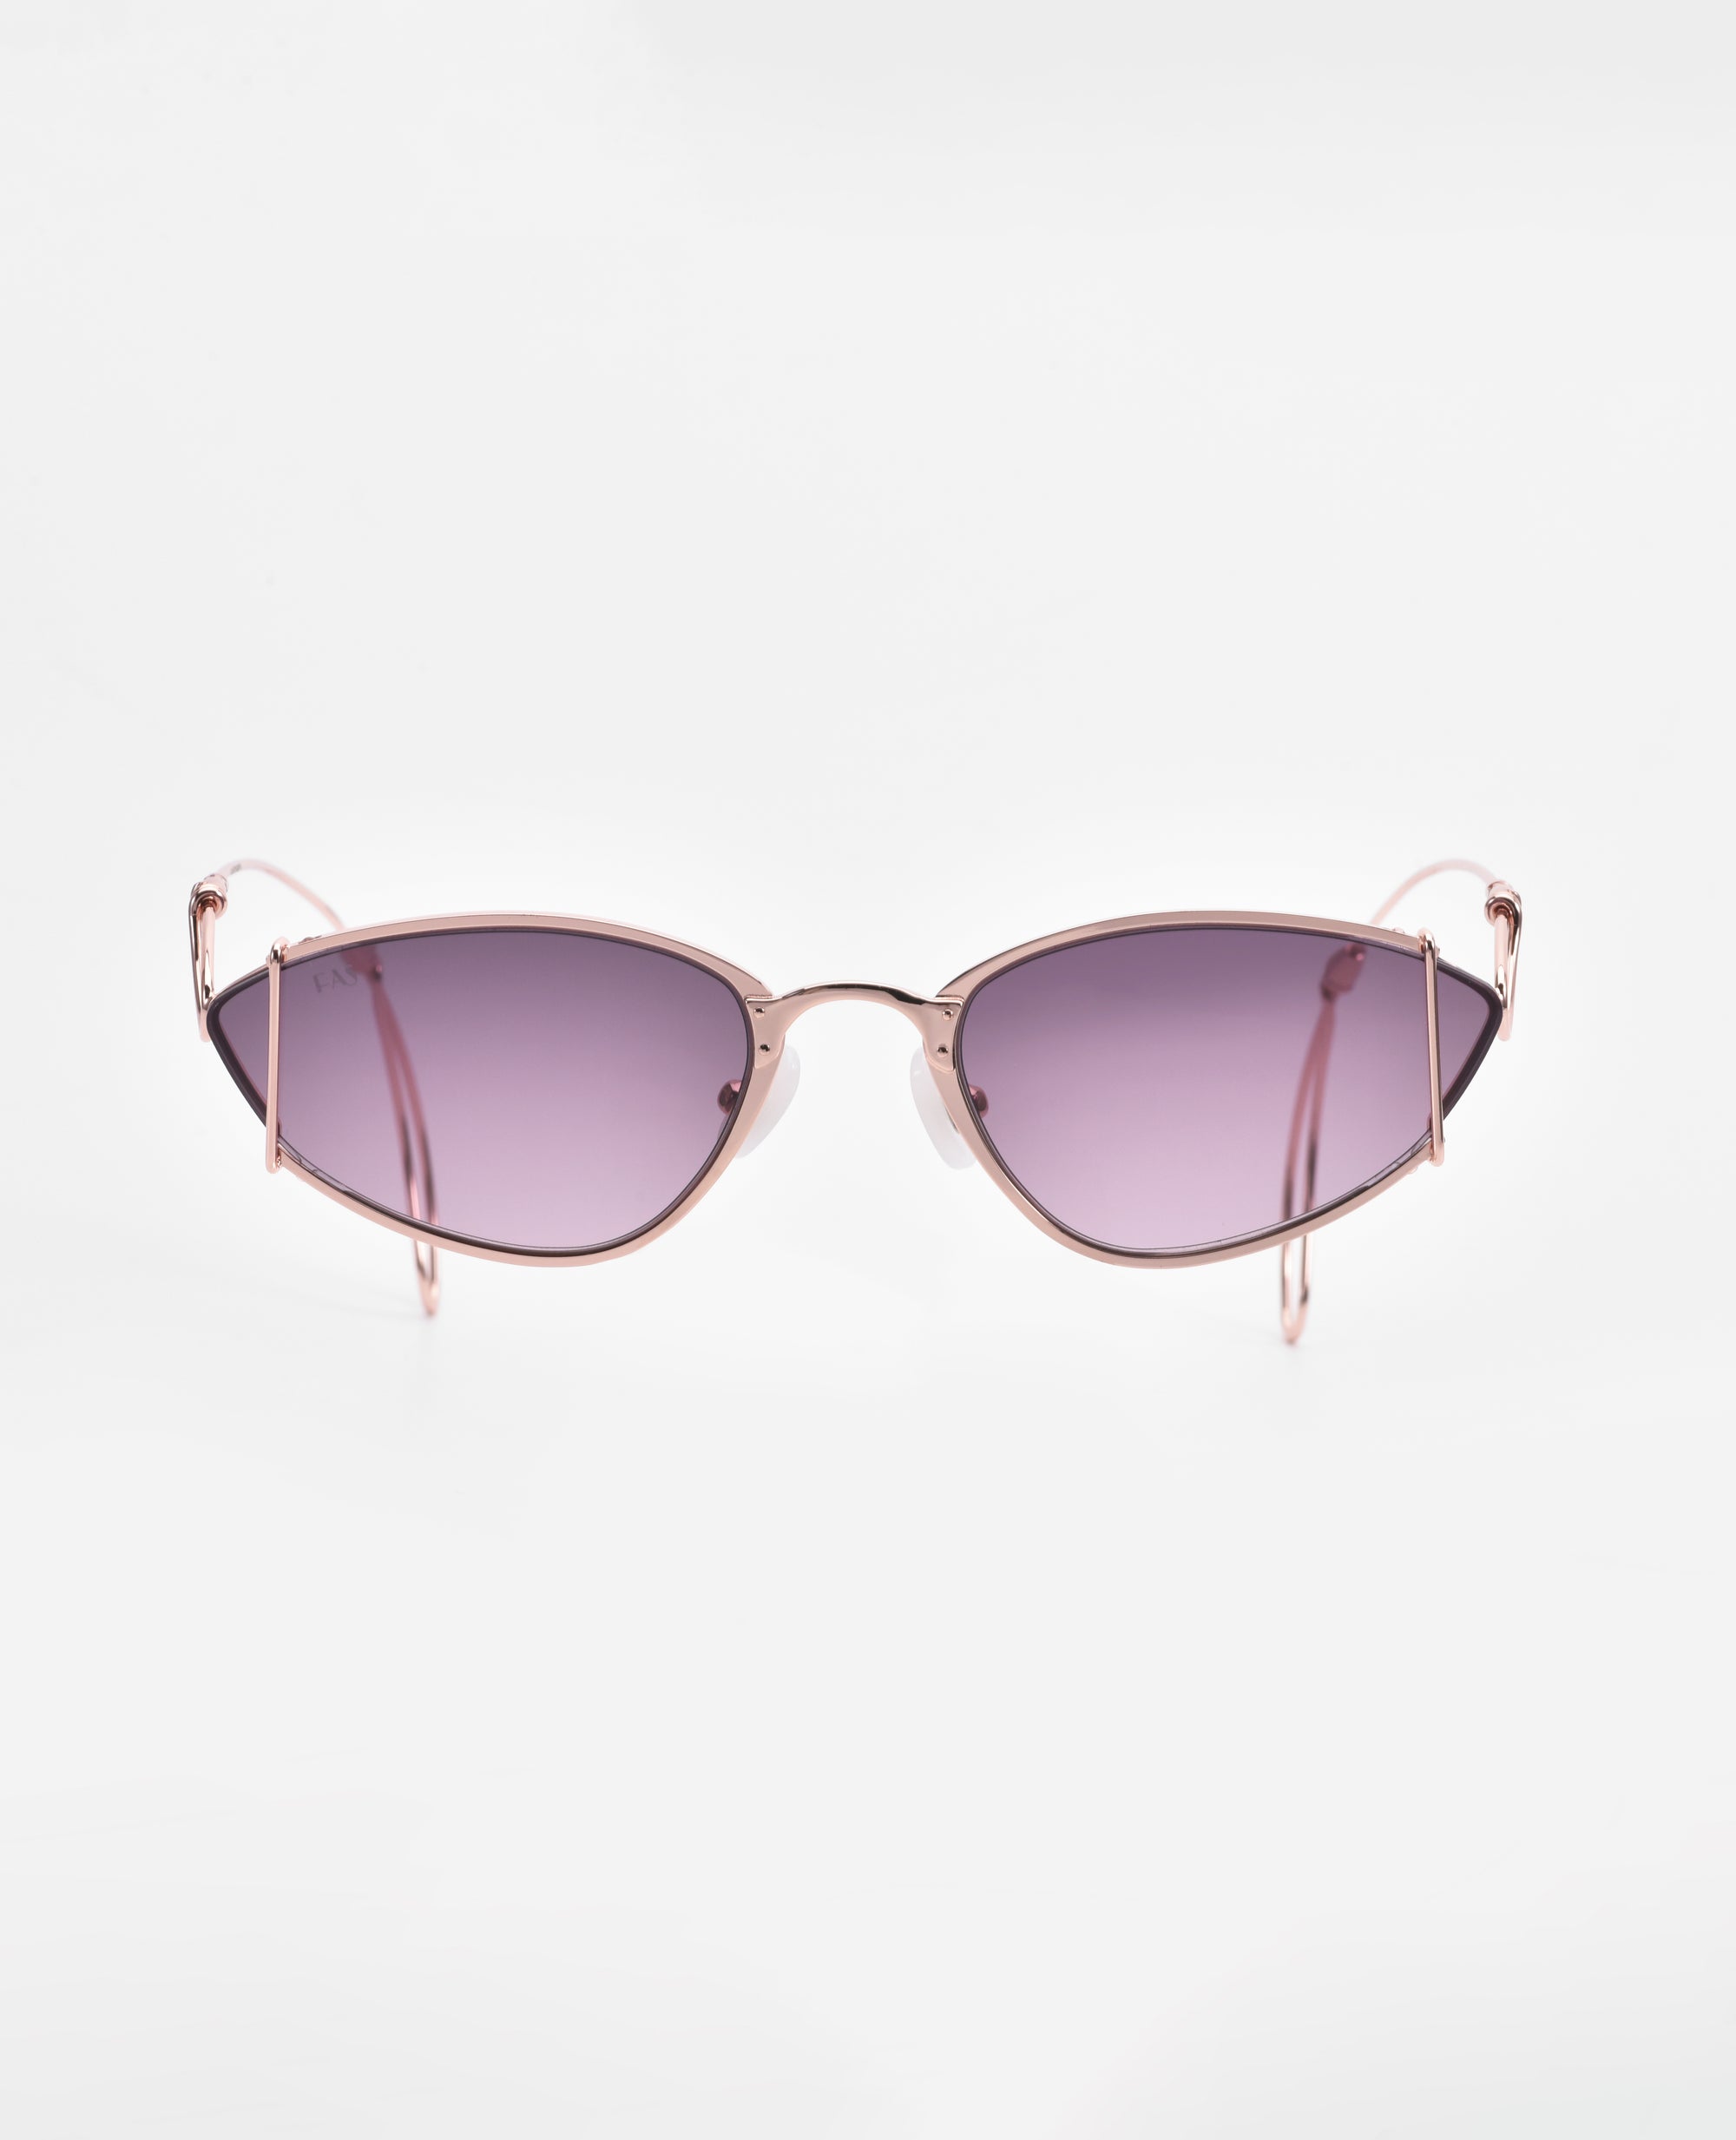 A pair of stylish, cat-eye sunglasses with rose gold-plated stainless steel frames and dark purple lenses. The Ornate by For Art&#39;s Sake® are centered against a white background, showcasing their sleek and modern design while offering 100% UVA &amp; UVB protection and an anti-reflective coating.